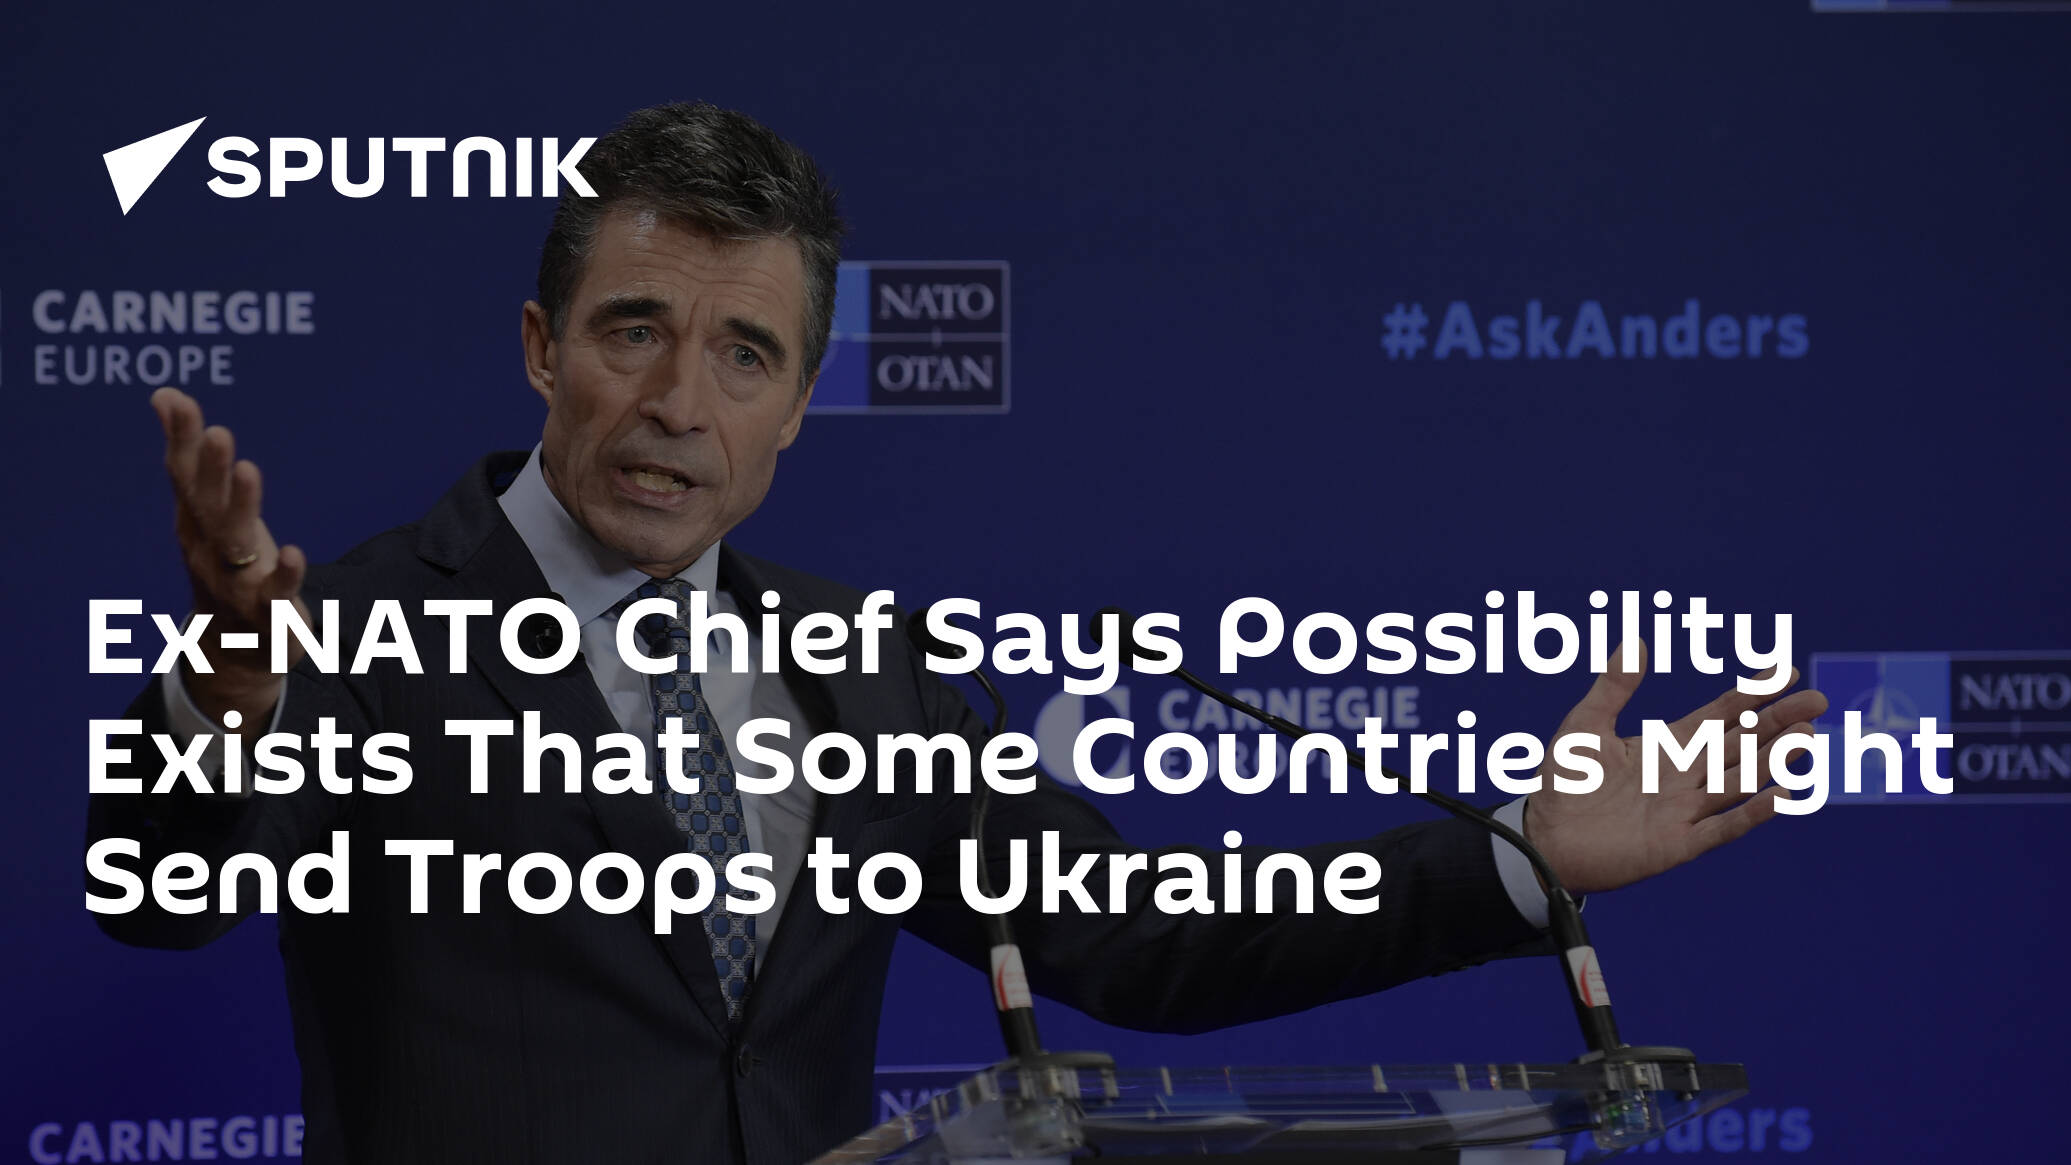 Ex-NATO Chief Says Possibility Exists That Some Countries Might Send Troops to Ukraine